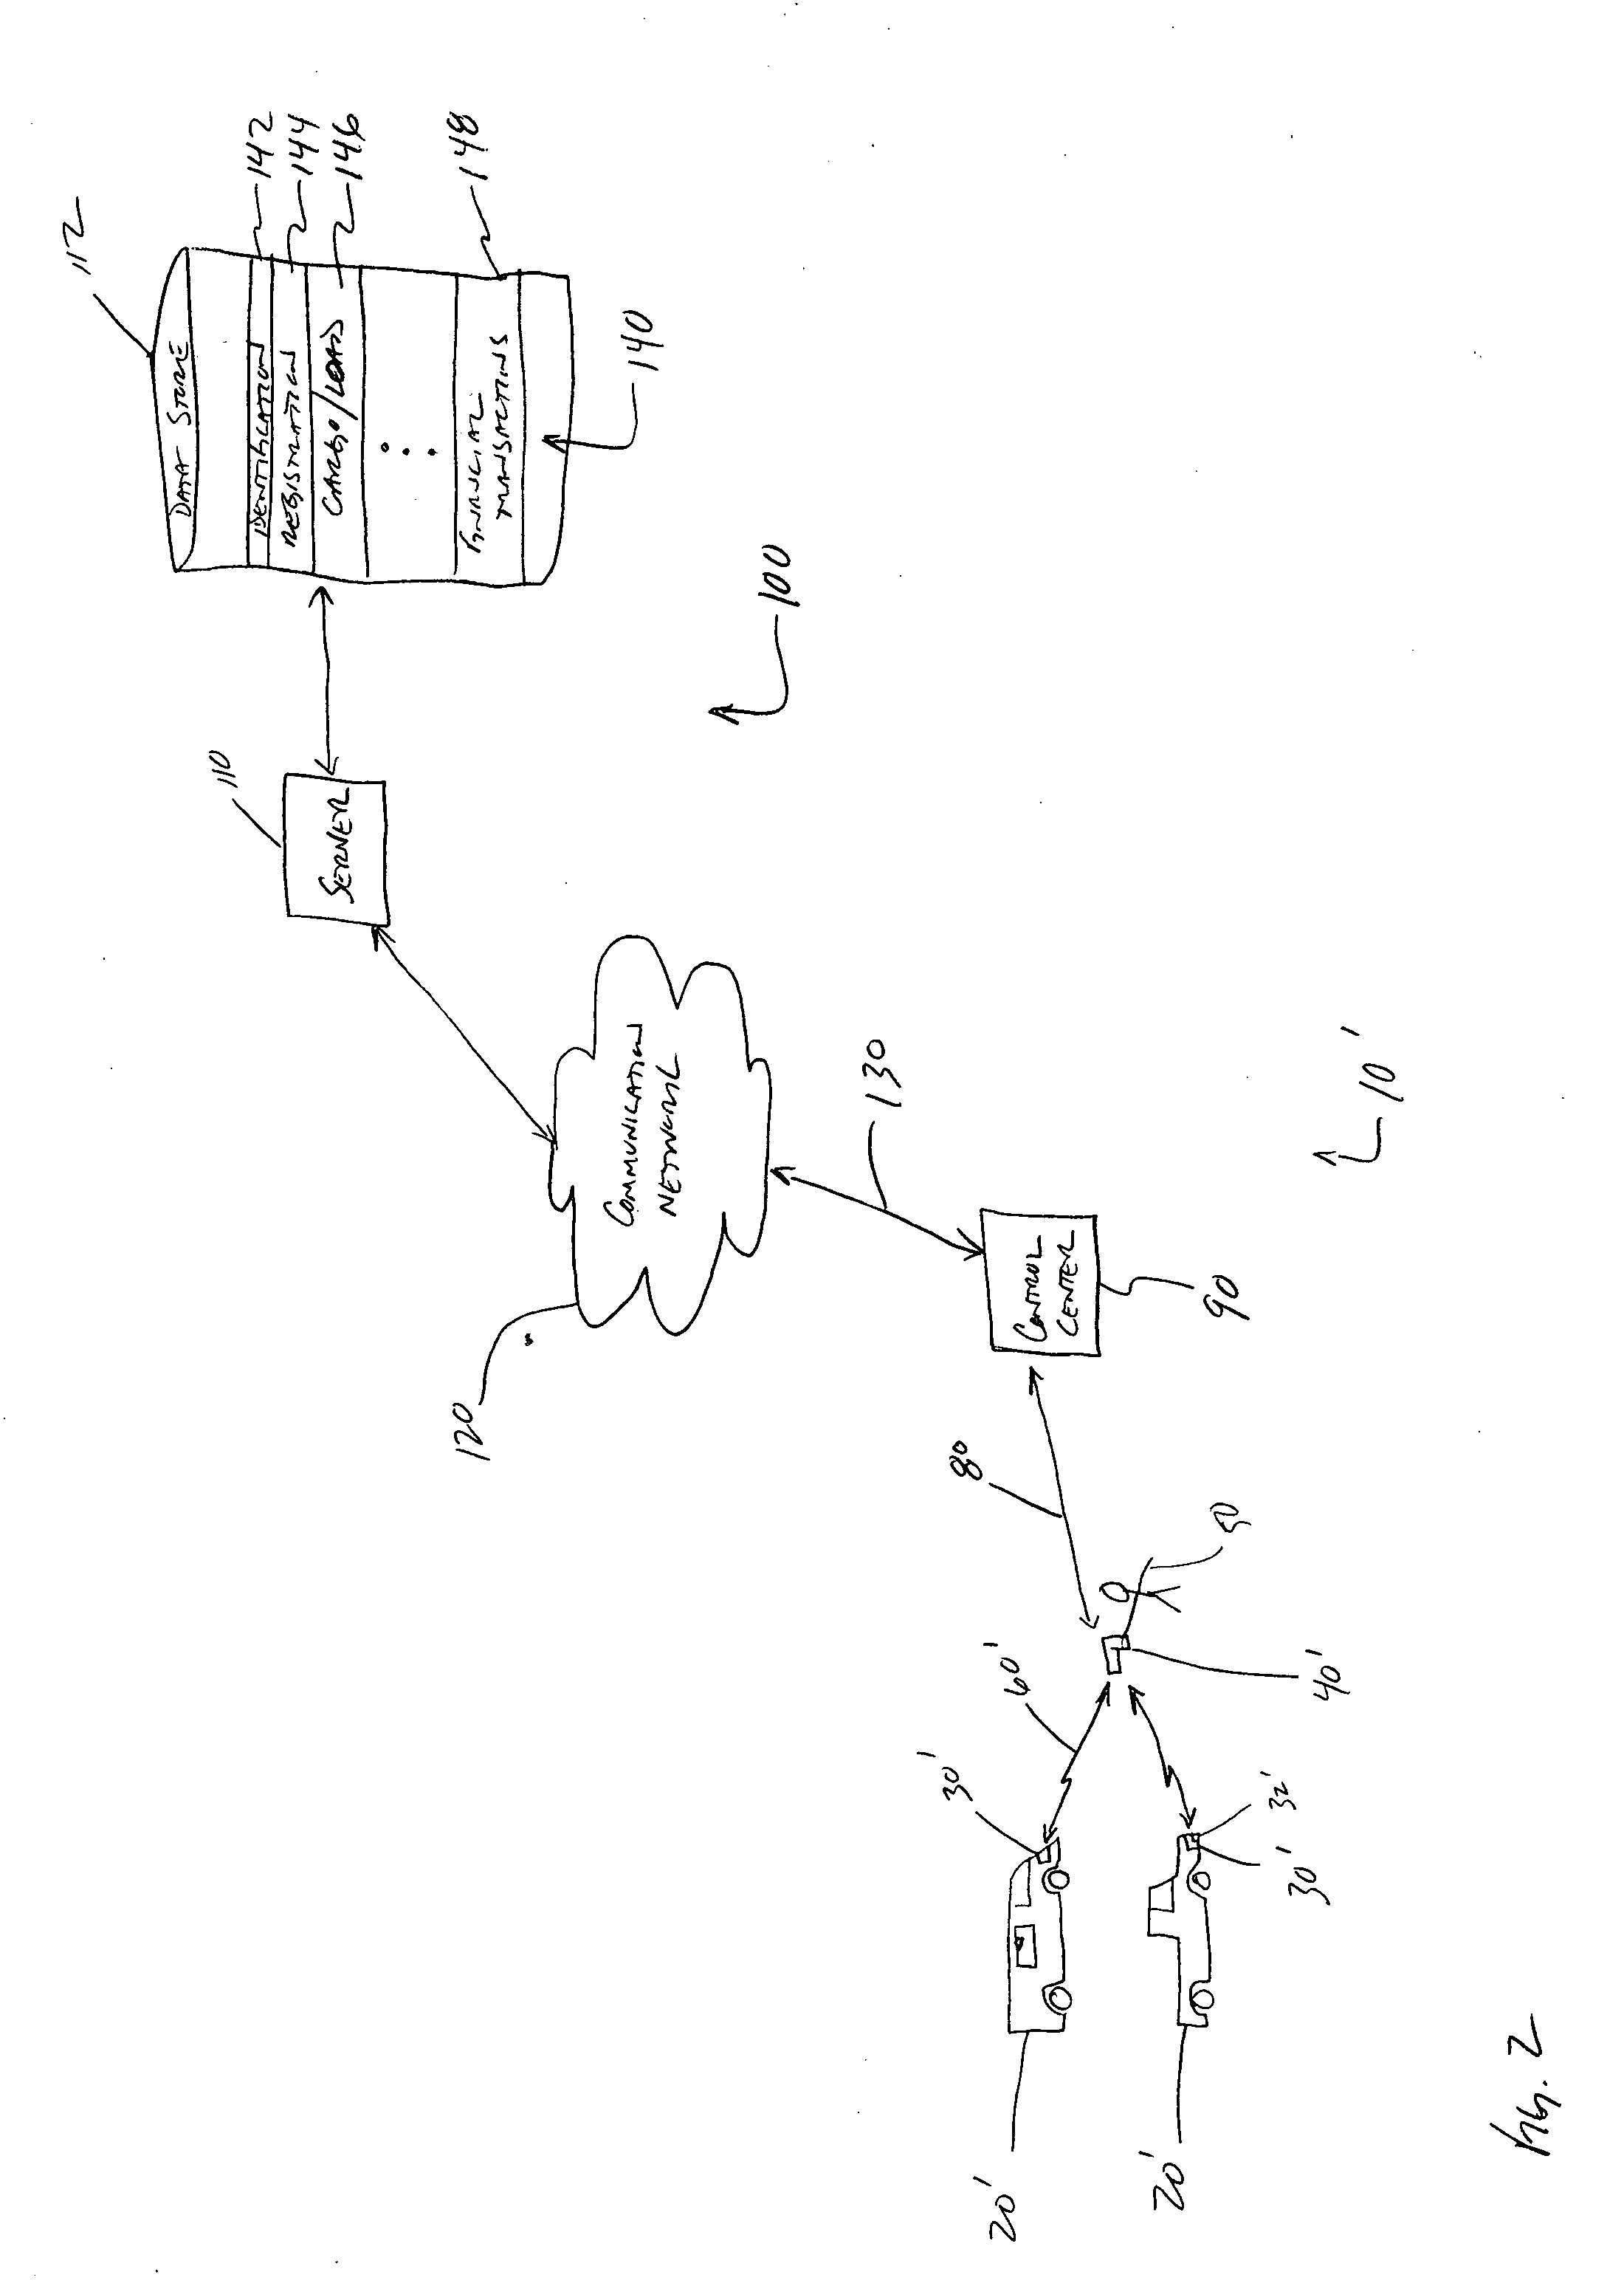 System and method for identifying objects of value